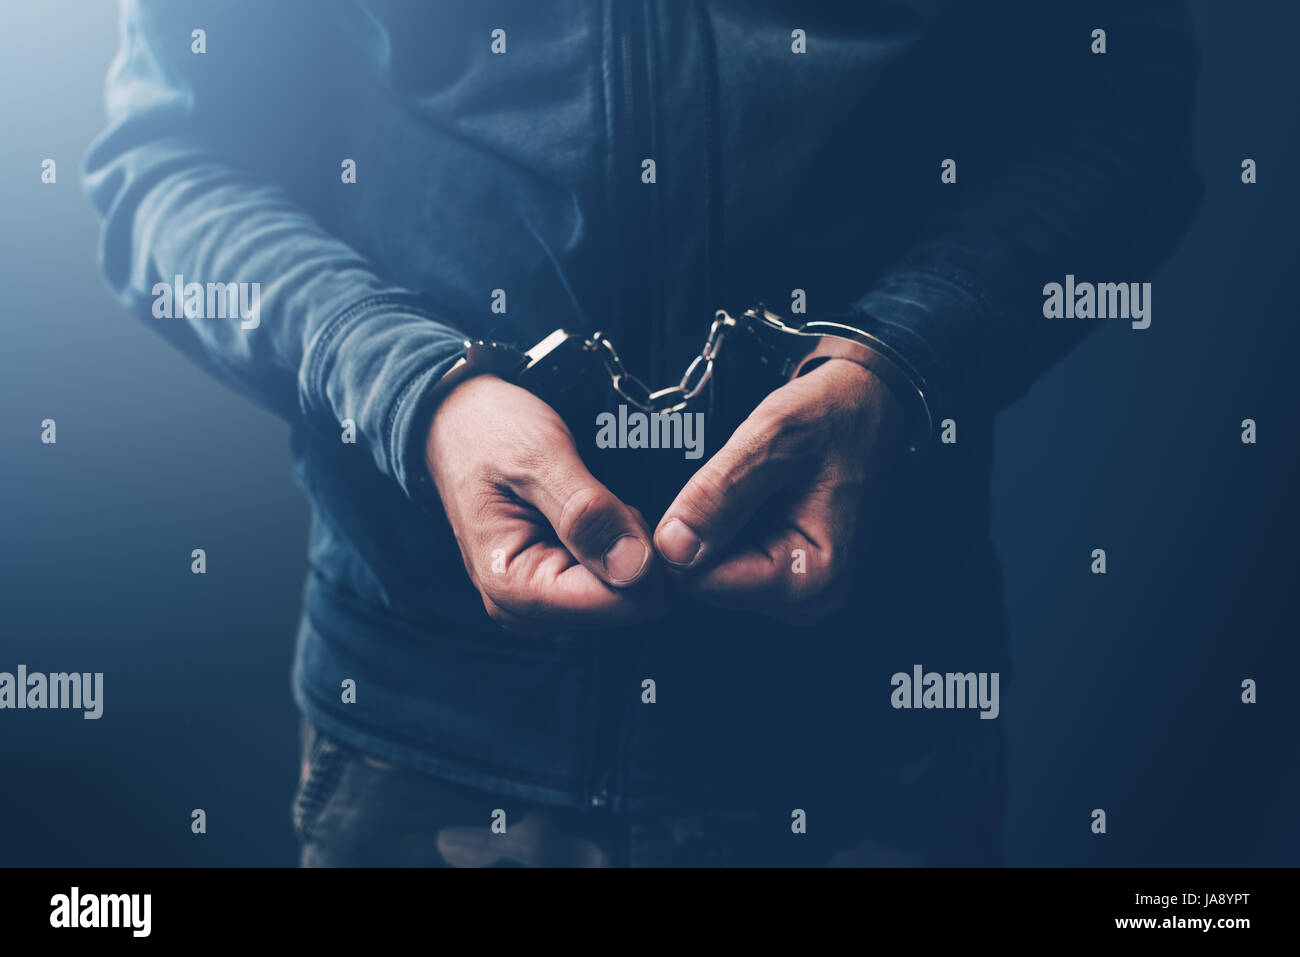 Arrested computer hacker and cyber criminal with handcuffs, close up of hands Stock Photo